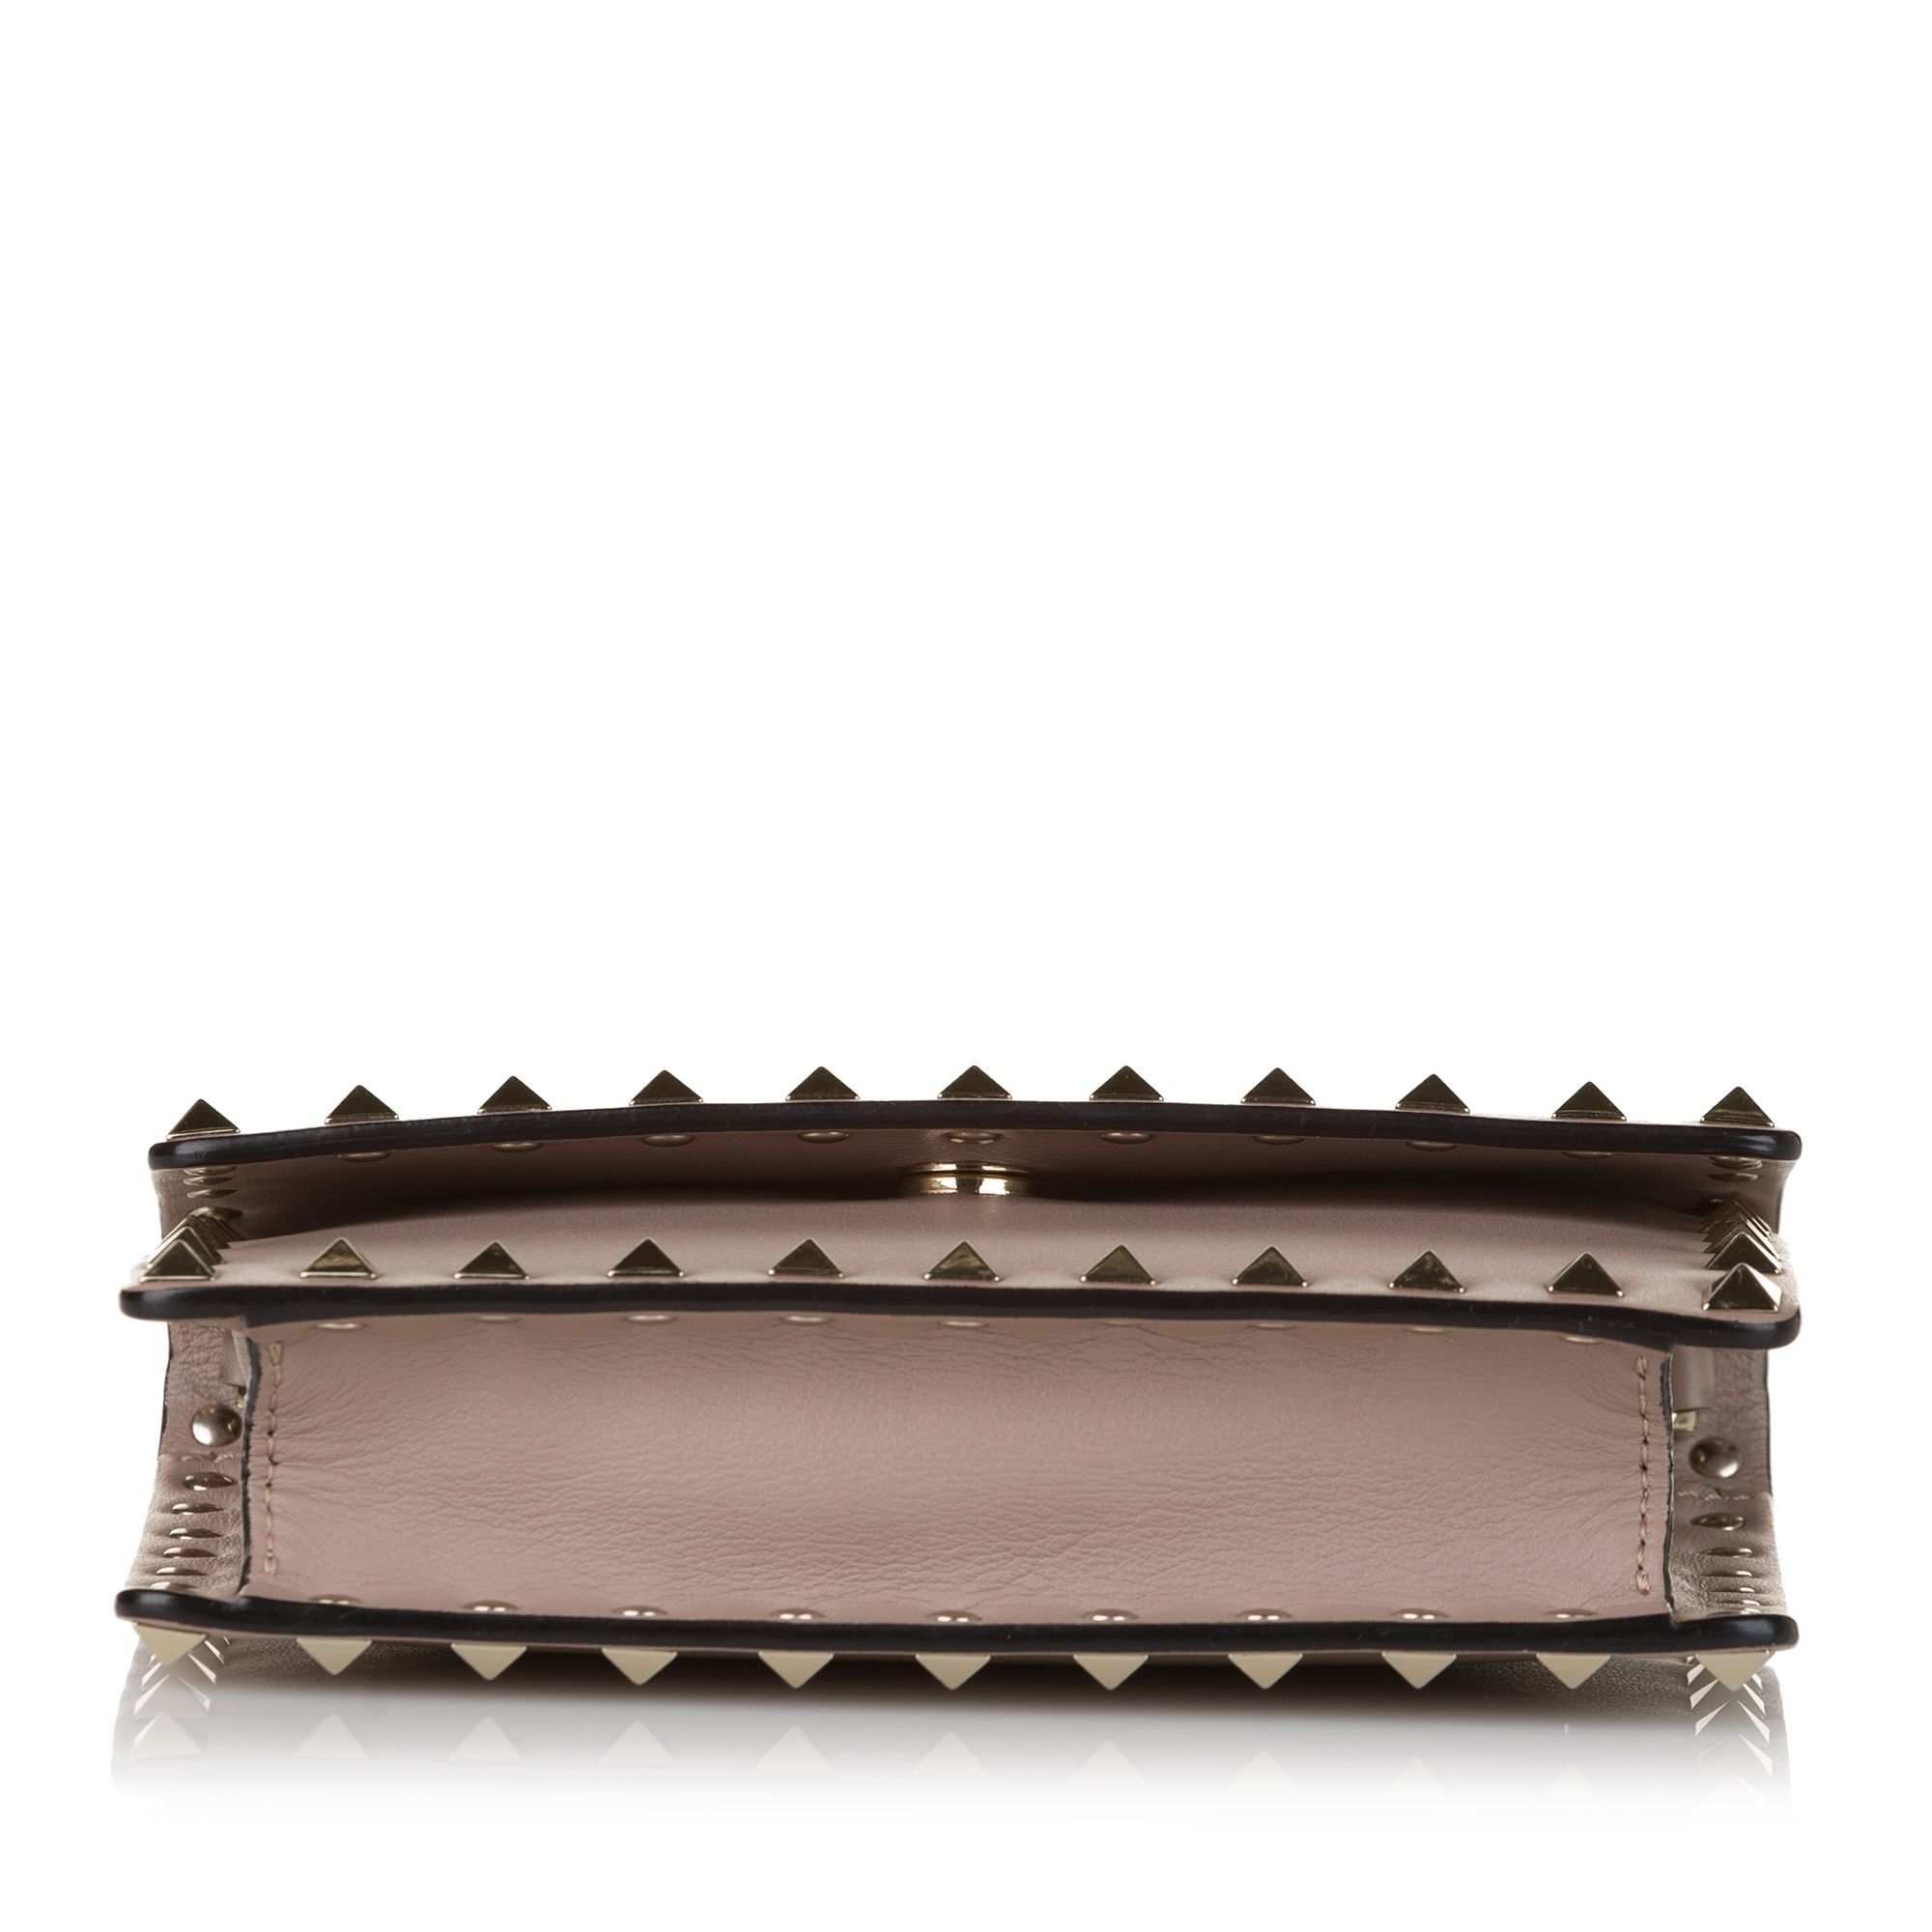 VINTAGE. RRP AS NEW. This crossbody bag features a leather body with stud details, a studded flat leather strap, a front flap with a magnetic snap closure, and an interior slip pocket.

Dimensions:
Length 12cm
Width 16cm
Depth 4cm
Shoulder Drop 58cm

Original Accessories: Dust Bag

Color: Brown x Beige
Material: Leather x Calf
Country of Origin: Italy
Boutique Reference: SSU162687K1342


Product Rating: VeryGoodCondition

Certificate of Authenticity is available upon request with no extra fee required. Please contact our customer service team.